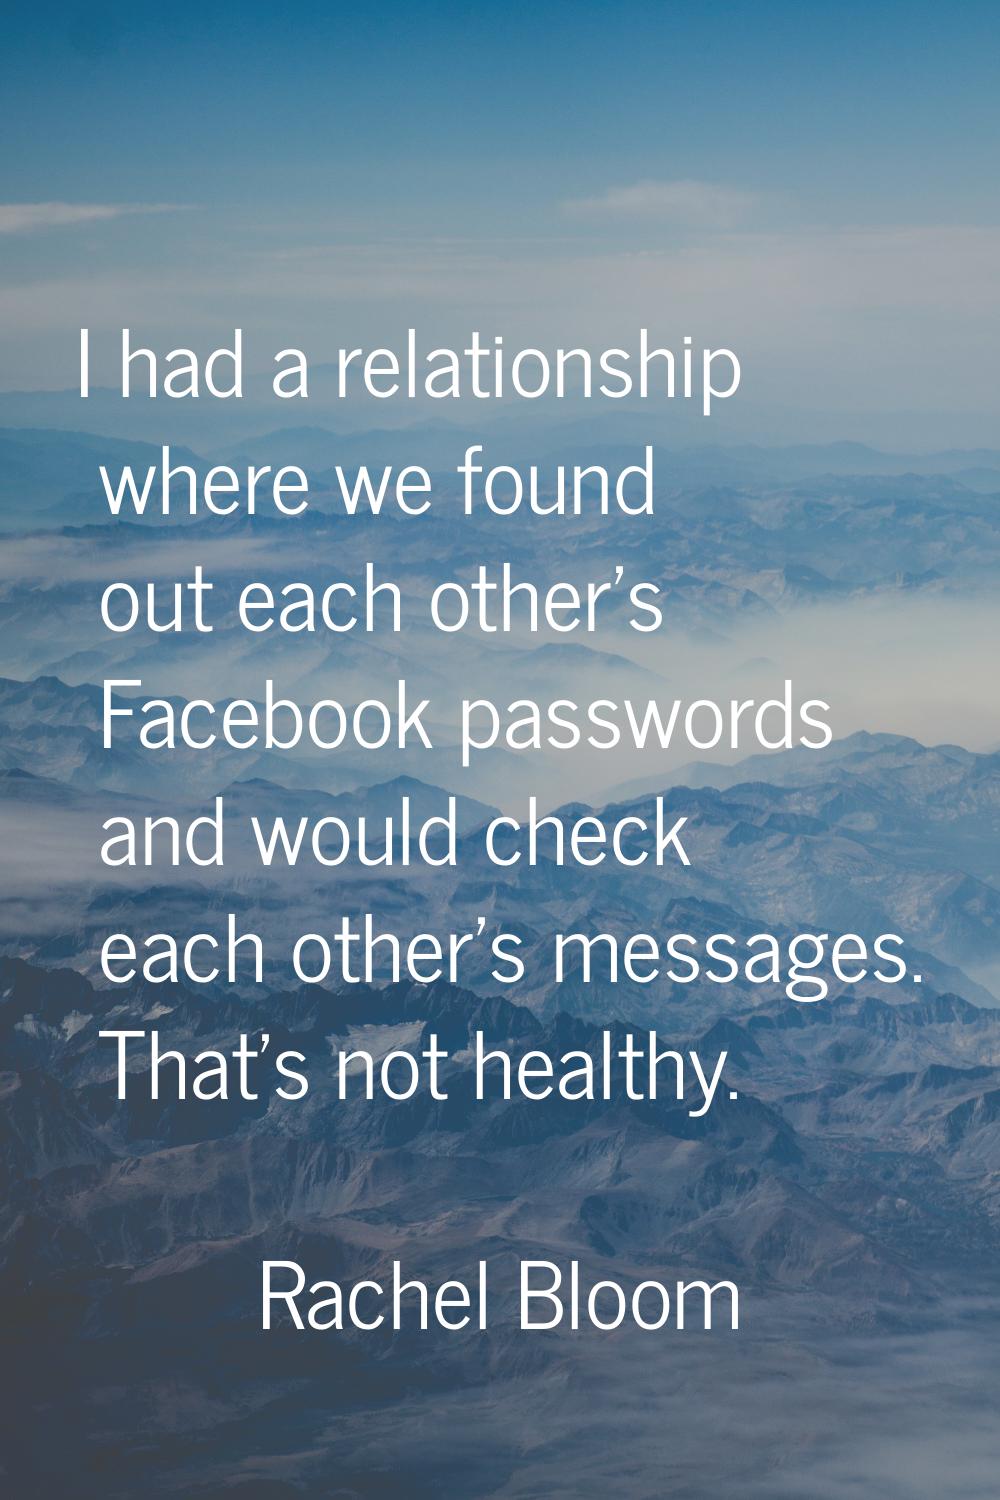 I had a relationship where we found out each other's Facebook passwords and would check each other'